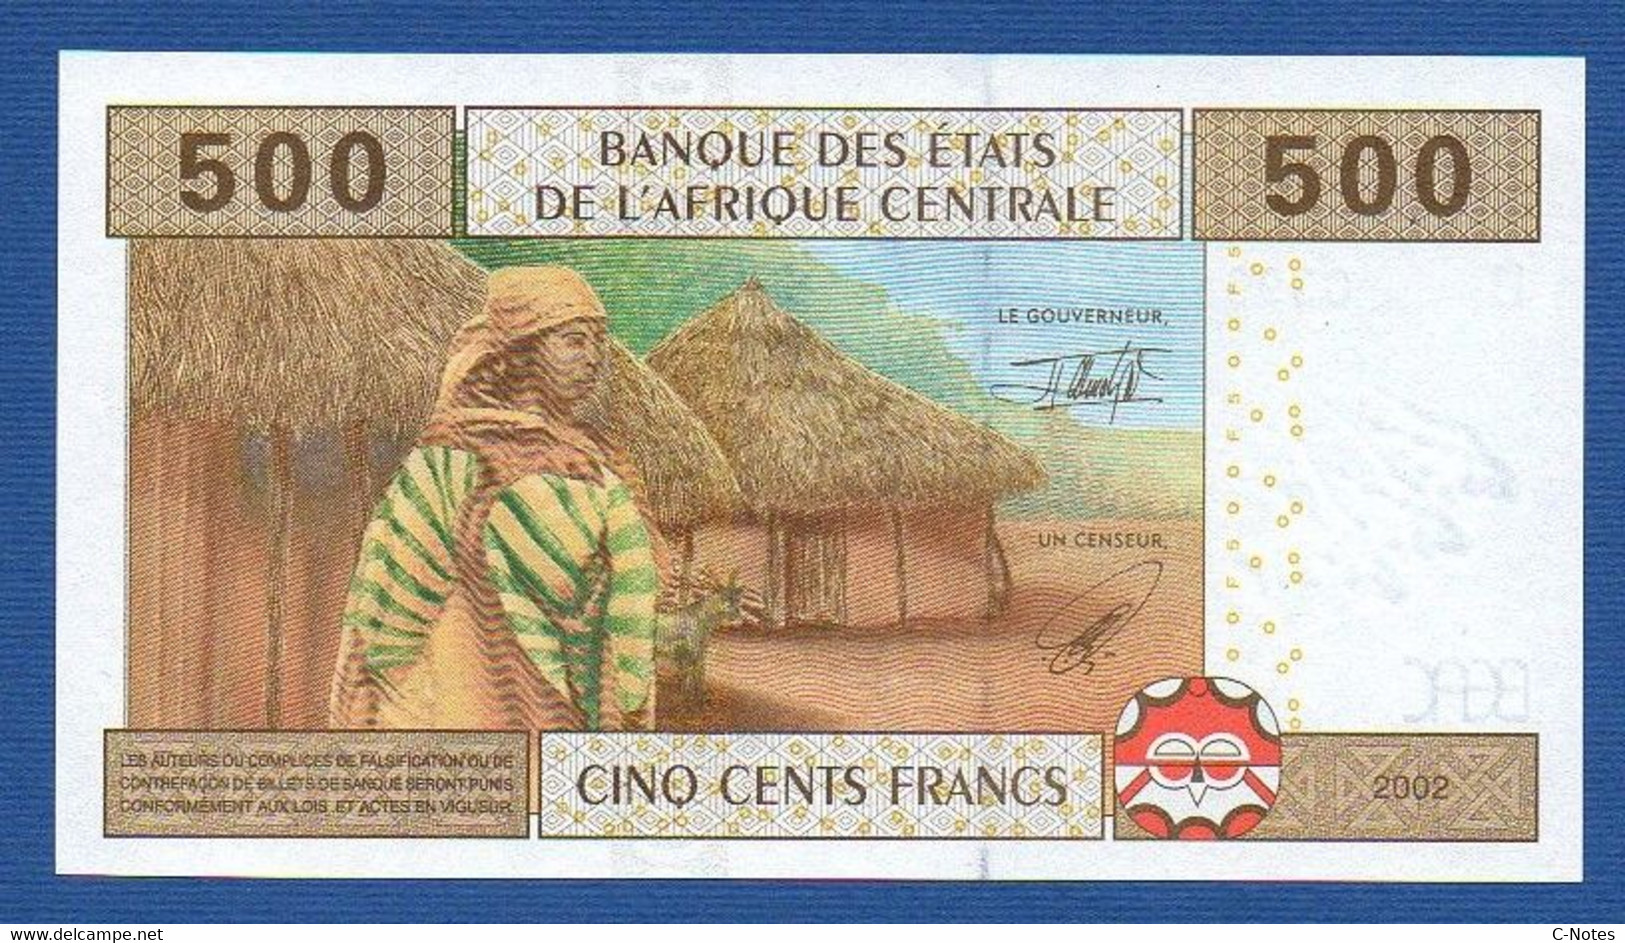 CENTRAL AFRICAN STATES - CAMEROON - P.206Ua – 500 FRANCS 2002 UNC, Serie U 039646890 - Centraal-Afrikaanse Staten